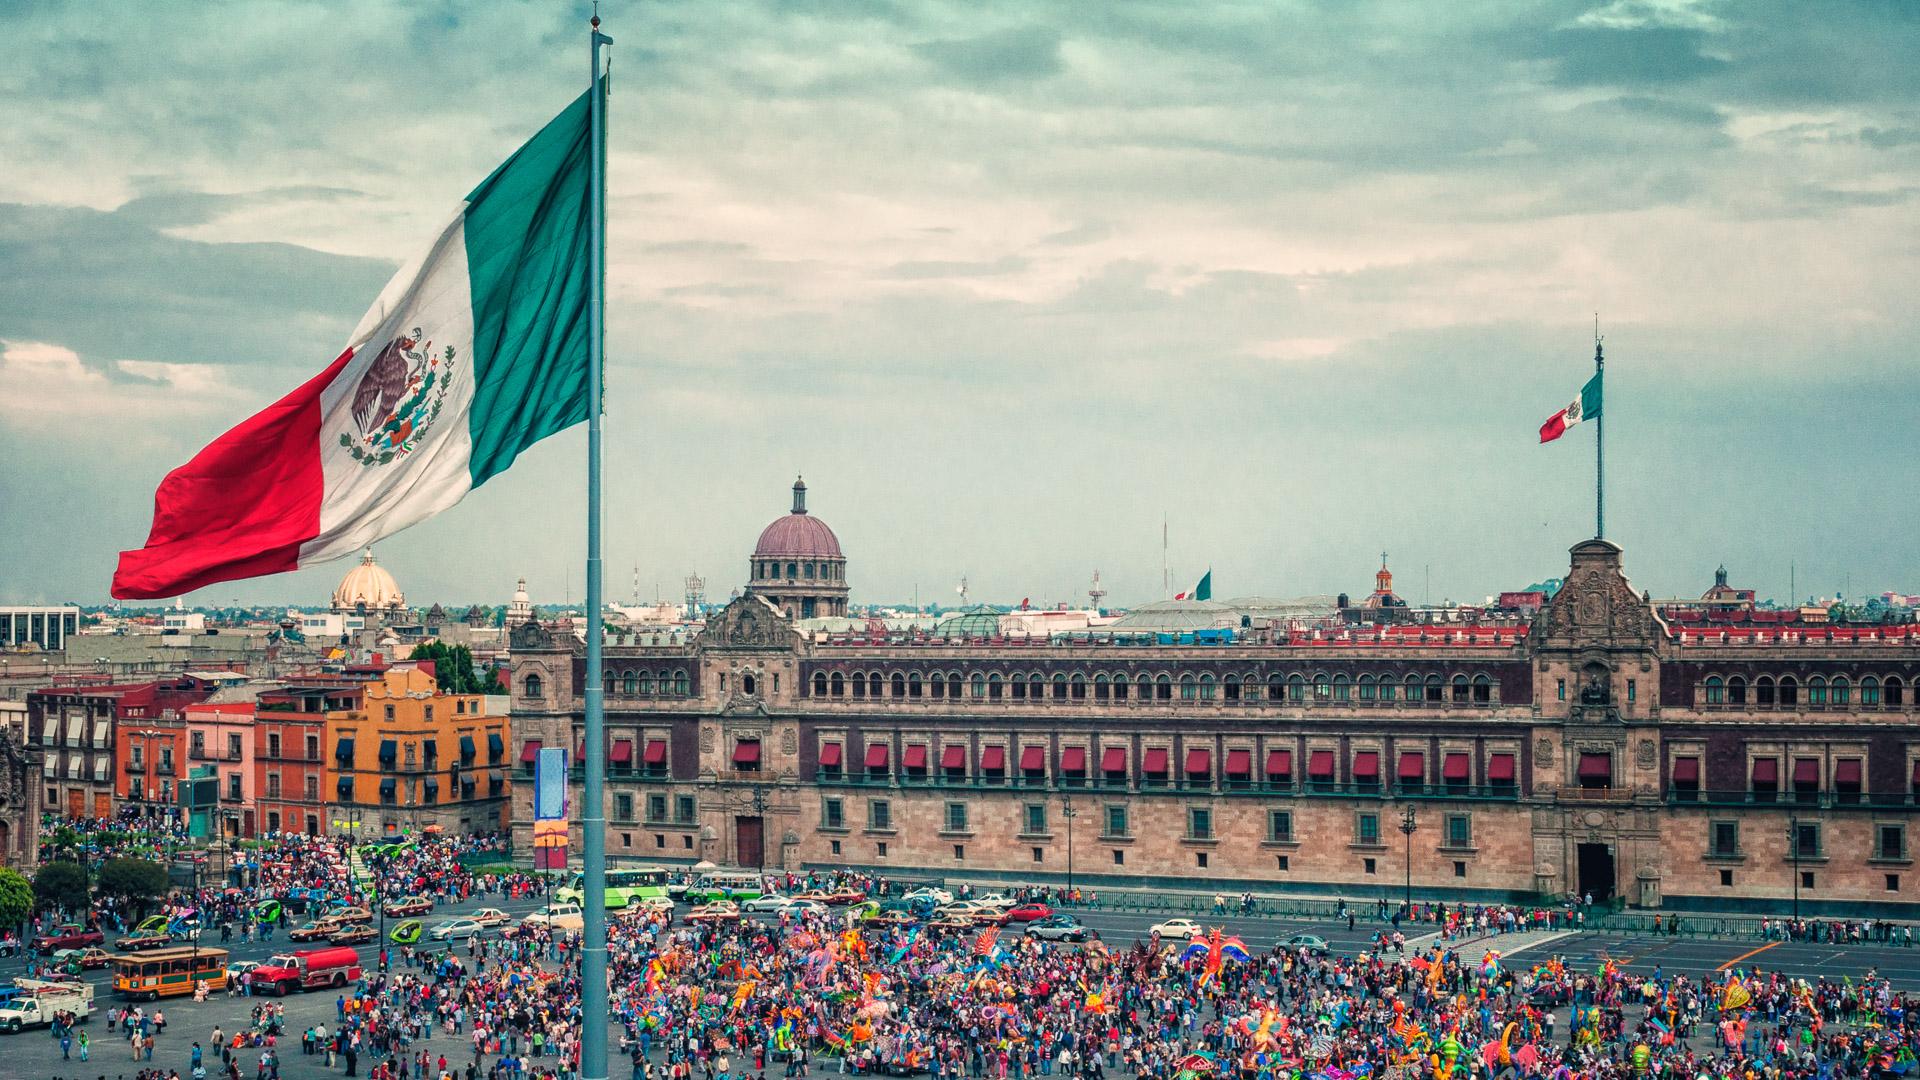 Principal Square with Flag in Mexico City.